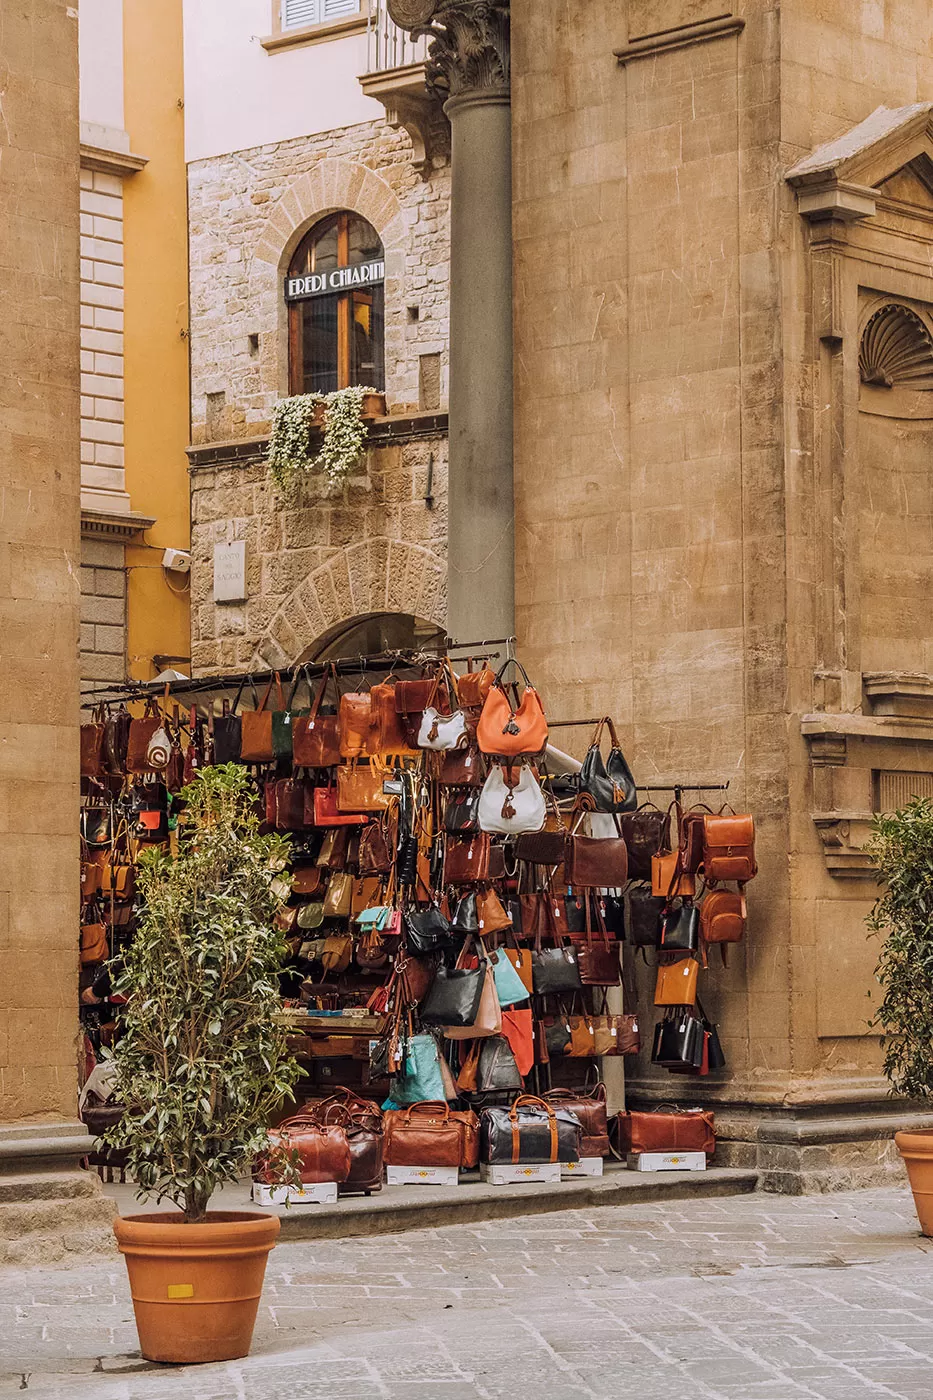 Free Things to do in Florence - Mercato Nuovo Leather market